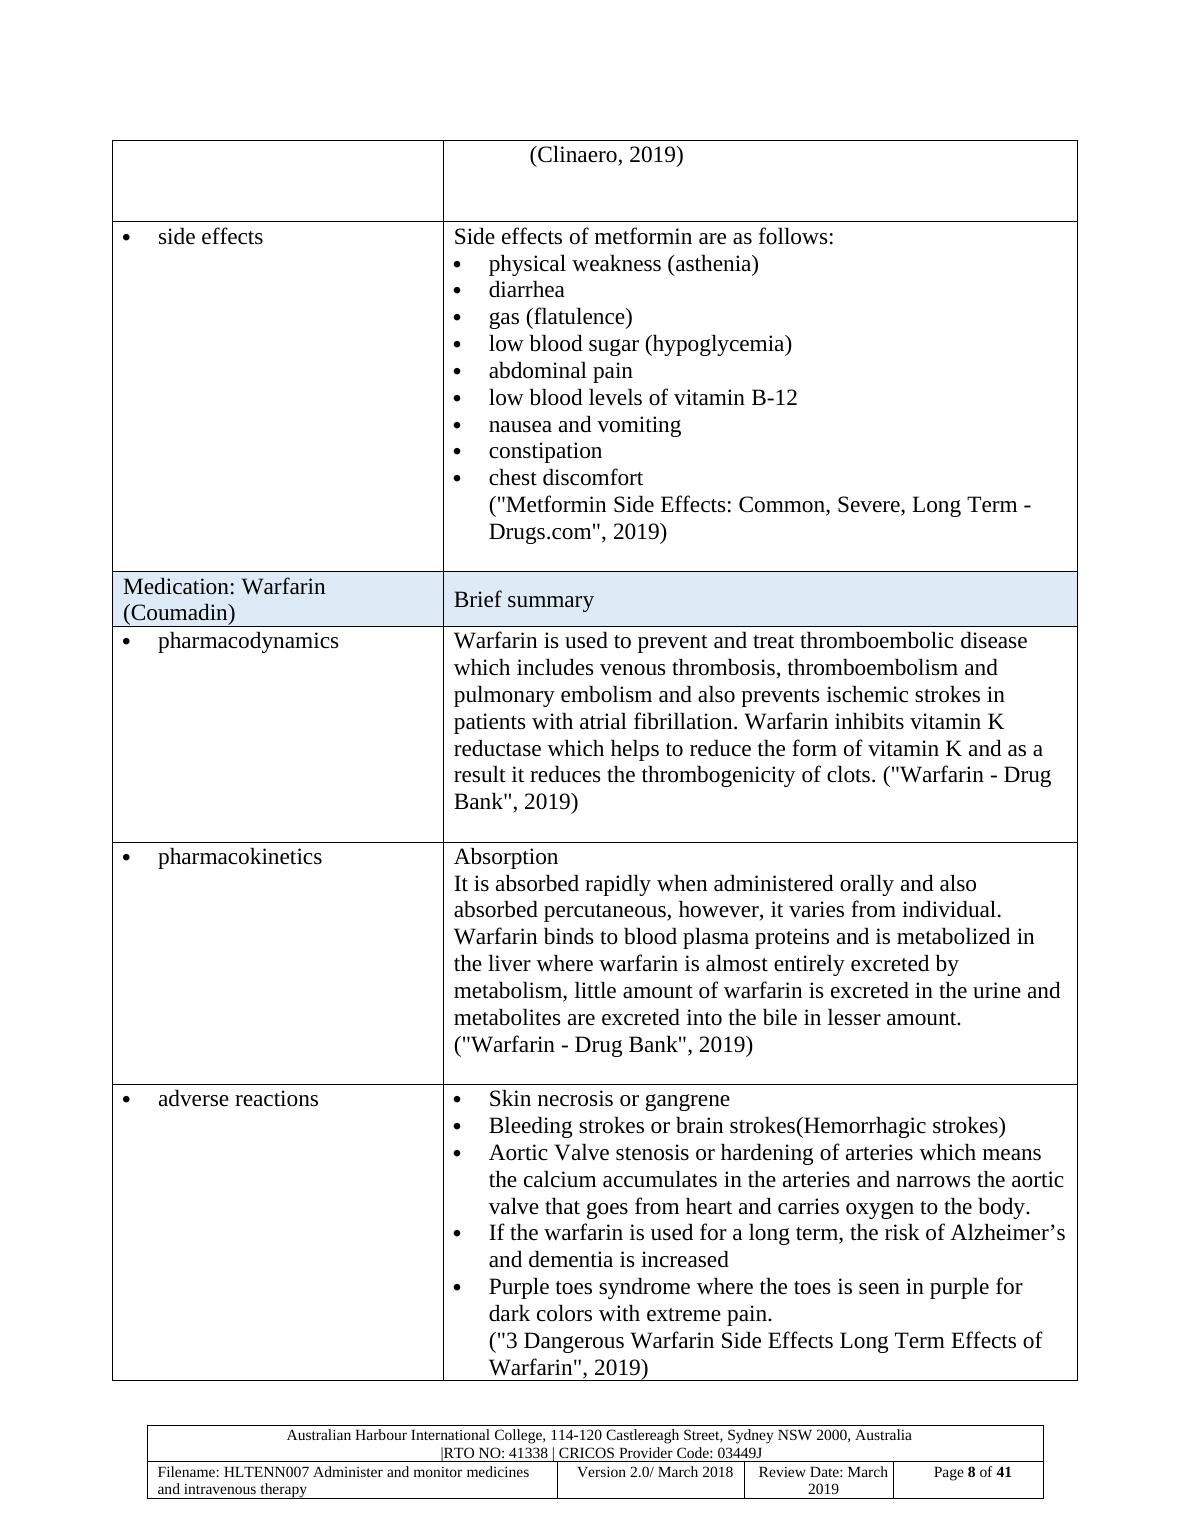 Research Work/Project Work - Medication Summary_8